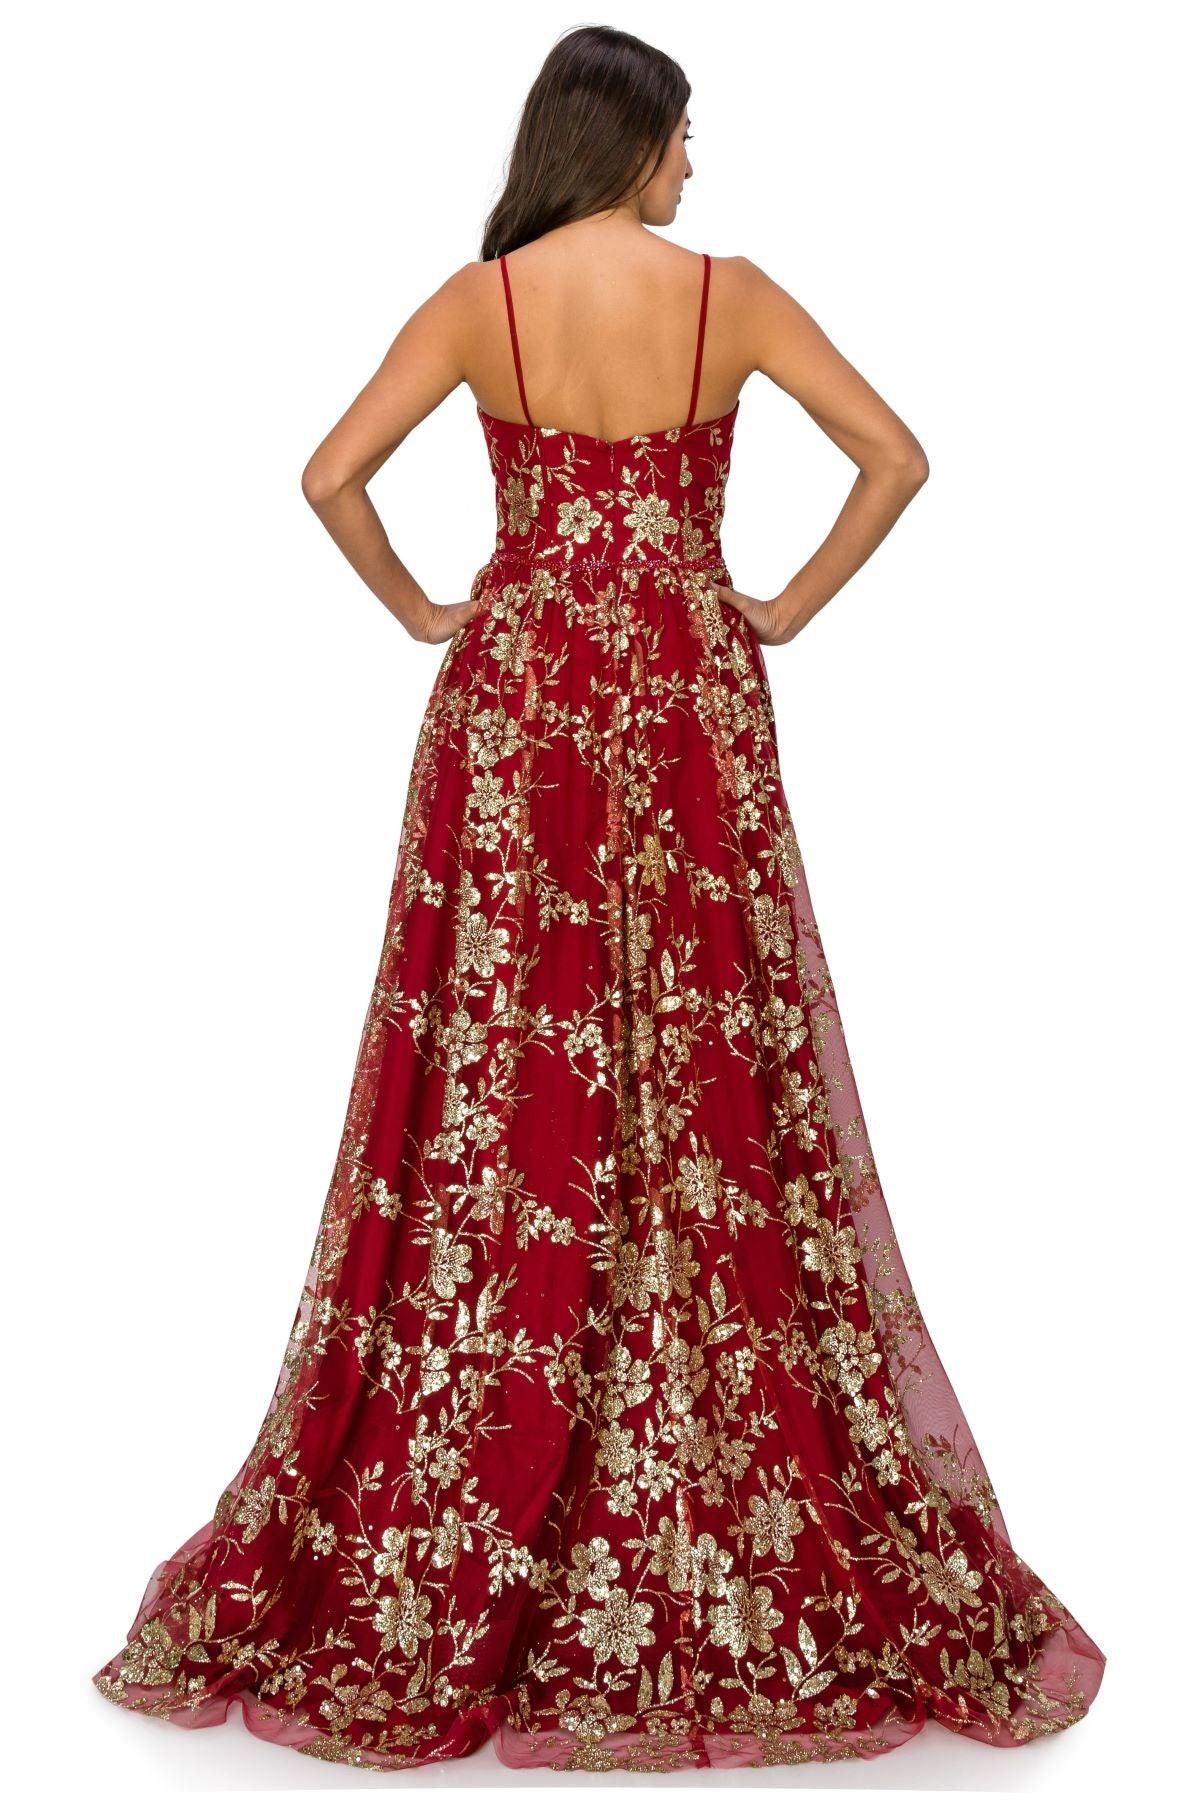 Cinderella Couture CC8043J Strapless Glittered Print A Line Gown Burgundy